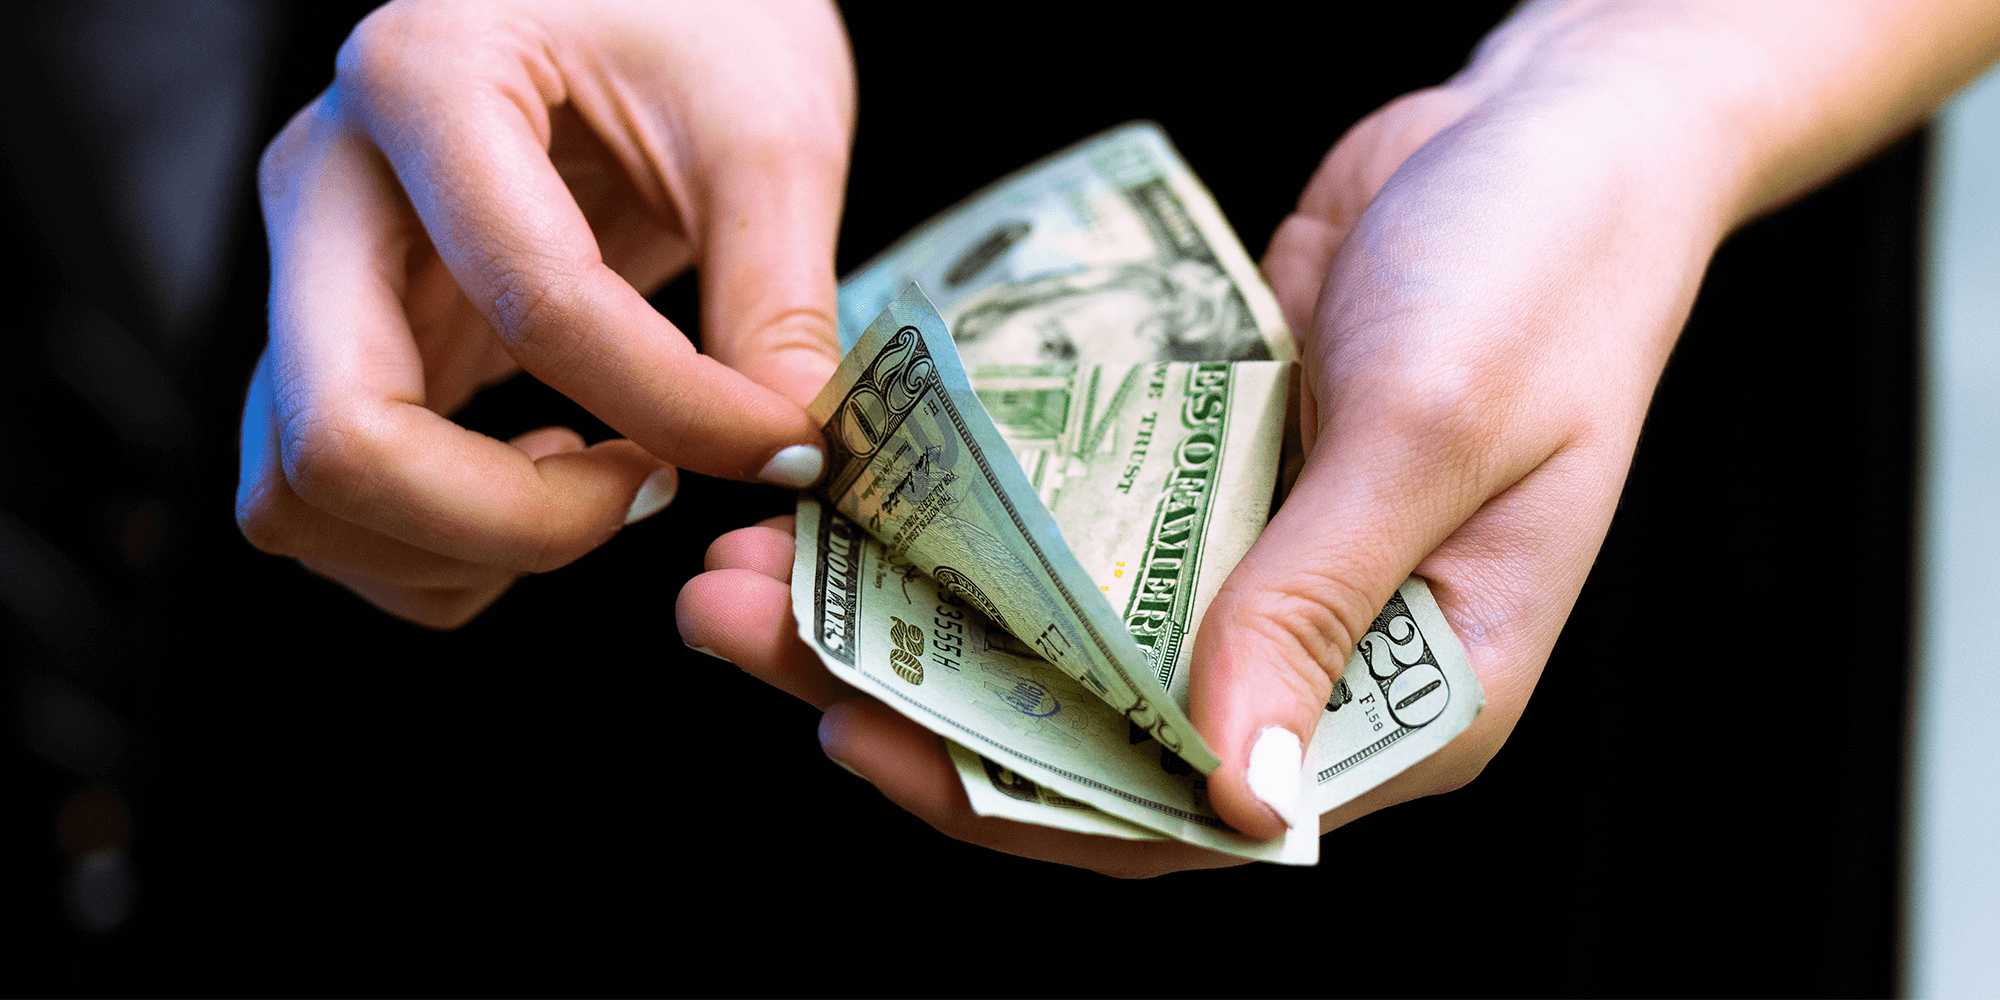 A person with their finger nails painted holds money in their hand counting it.